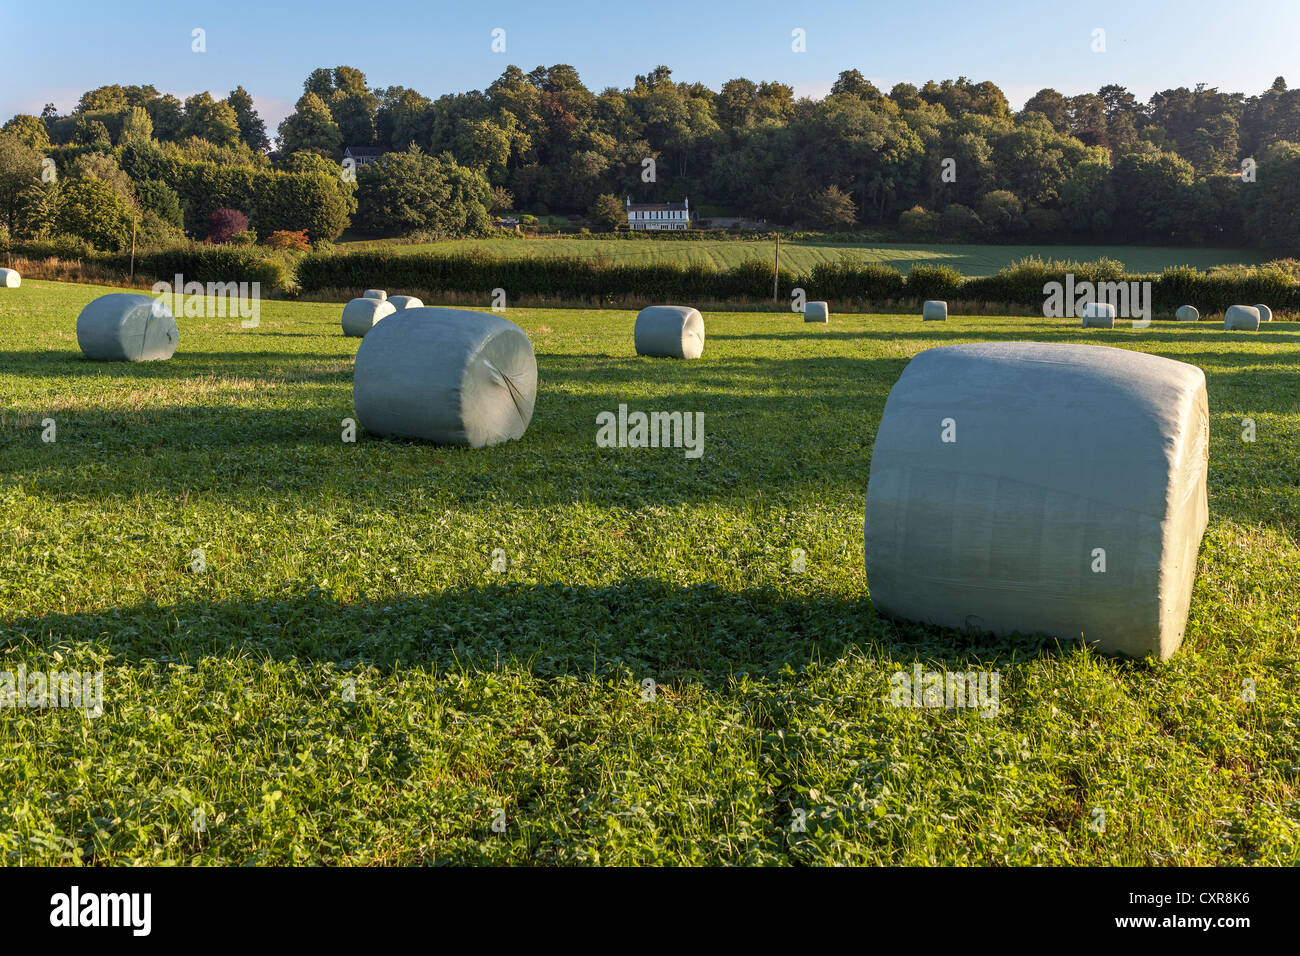 HAY BALES WRAPPED IN PLASTIC IN FIELD GLOUCESTERSHIRE ENGLAND UK Stock Photo